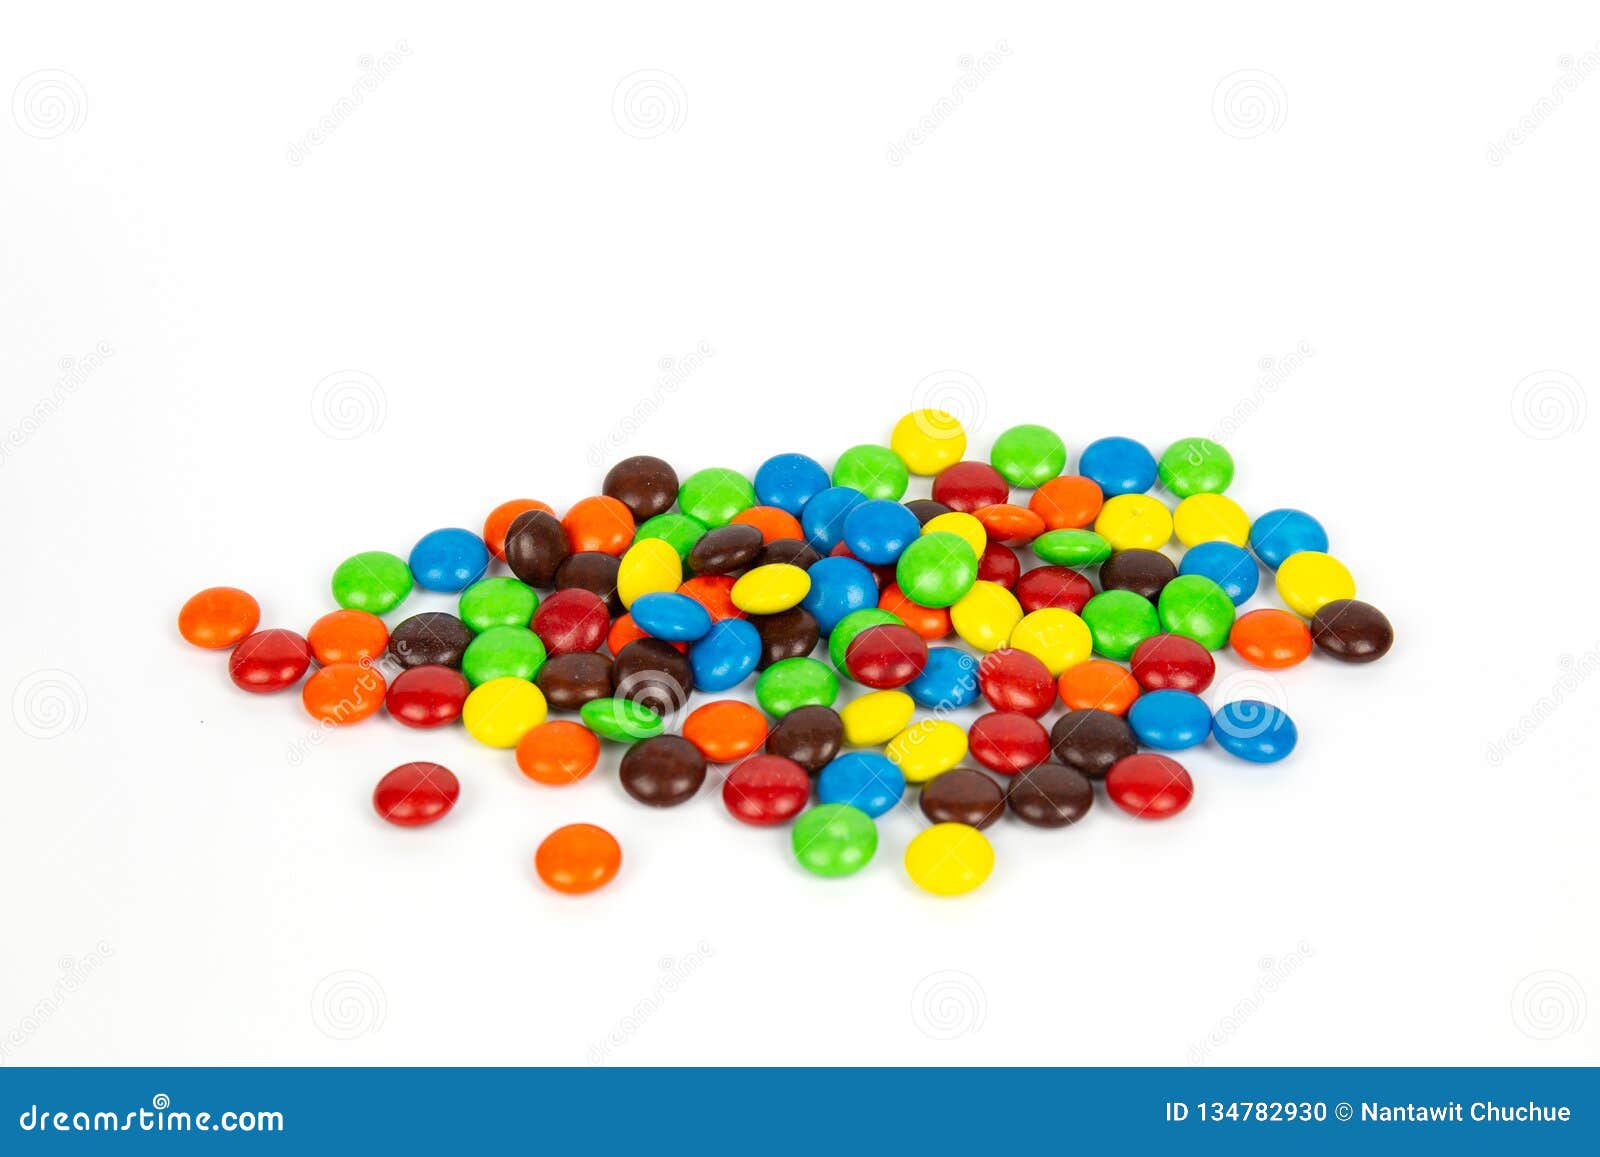 508 Chocolate Mms Stock Photos - Free & Royalty-Free Stock Photos from  Dreamstime